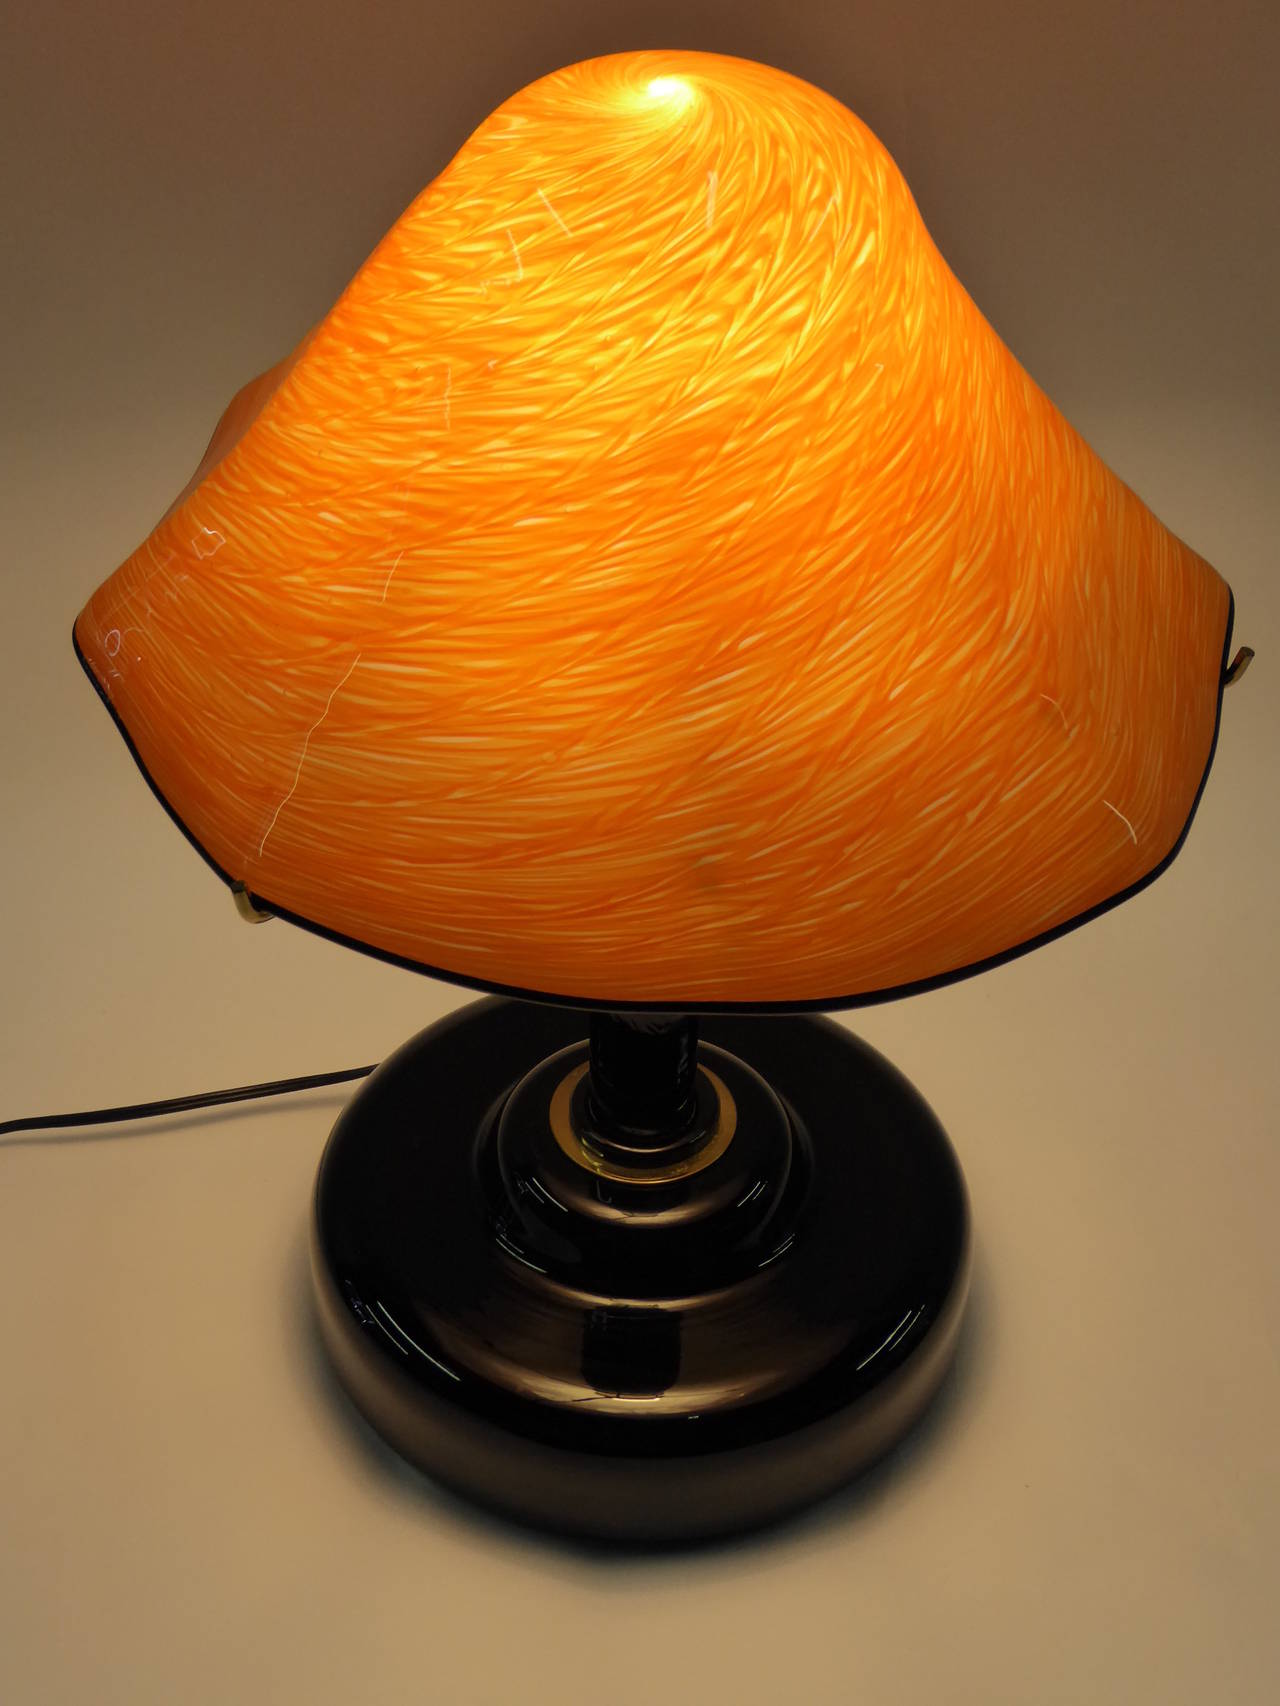 Extraordinary Fratelli Toso lamp featuring a heavy blown black glass socle base, black glass stem, brass trims and neck, with brass support arms for the orange swirl fazzoletti style blown cased glass shade. Heavy, thick and well-made. With Fratelli